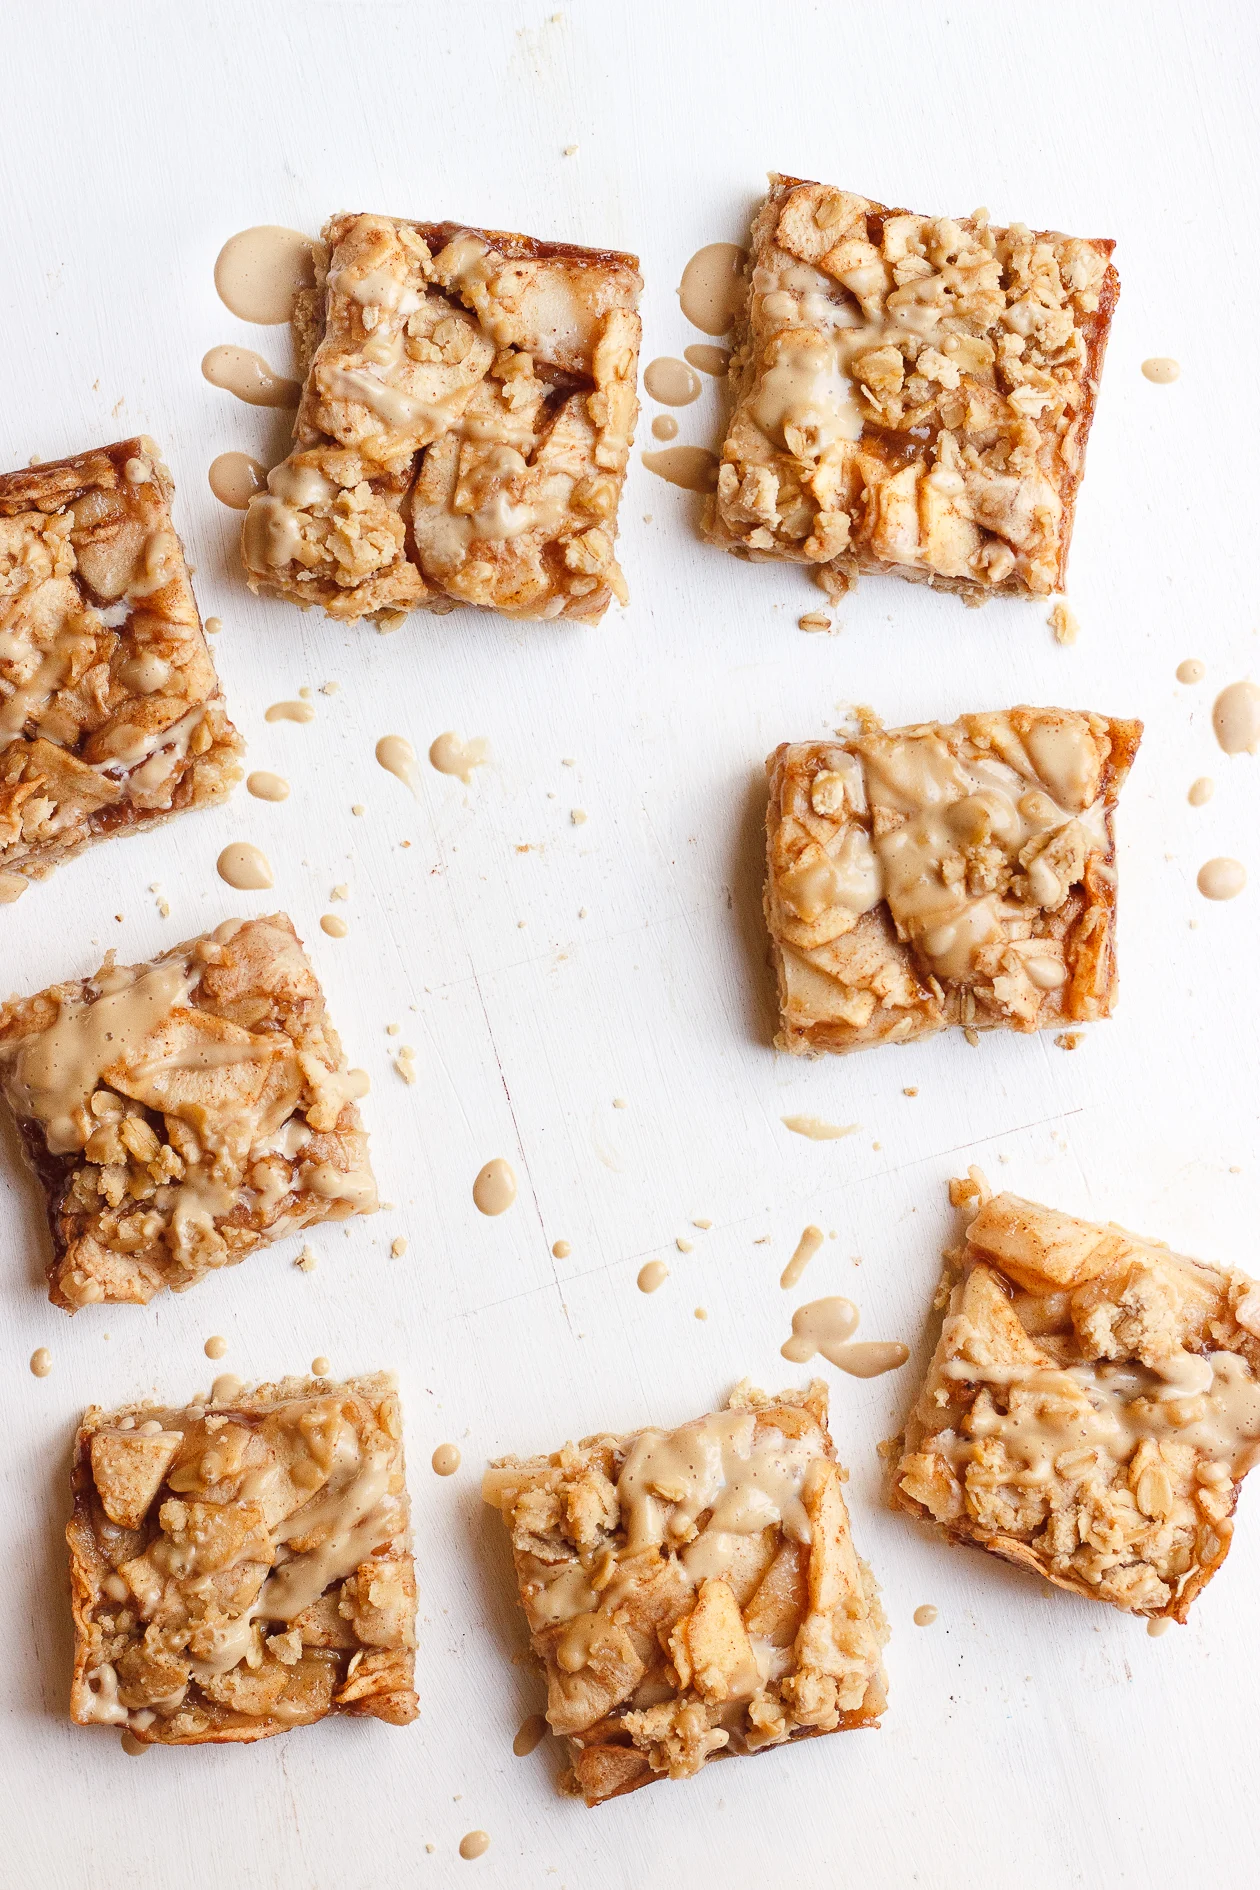 Apple Crumb Bars with Maple Coffee Glaze | These maple-sweetened, gluten-free and naturally vegan, oat apple crumb bars are fancied up with a light drizzle of a maple coffee glaze.